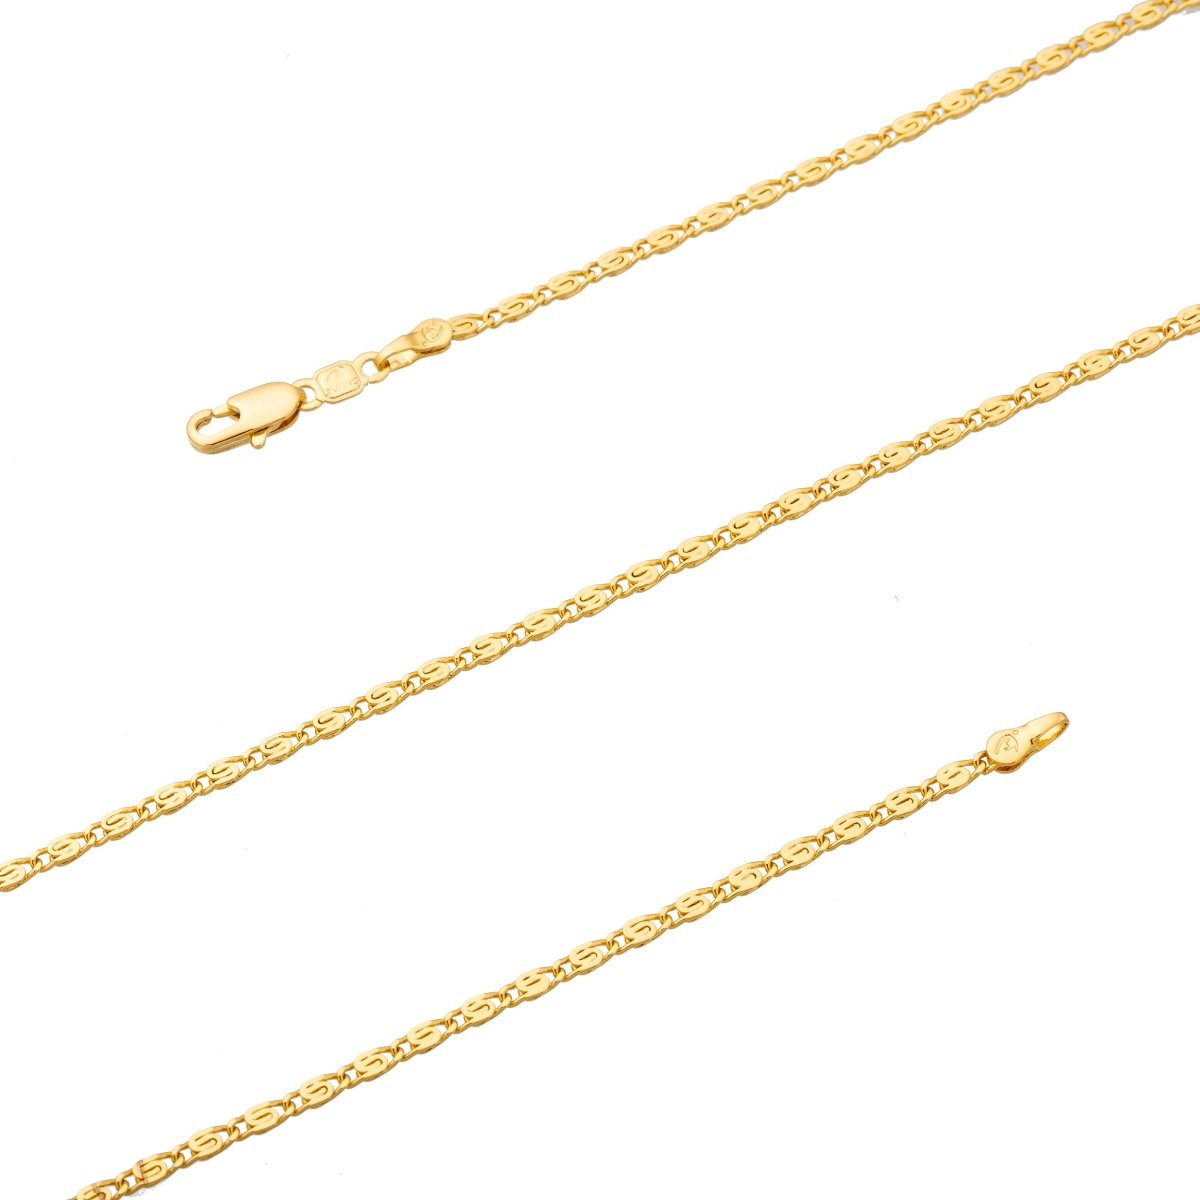 24K Gold Filled Snail Scroll Chain Necklace, 23.6 inch Layering "Yellow Gold" Snail Chain, Dainty 2.5mm Snail Necklace w/ Lobster Clasps | CN-189 Clearance Pricing - DLUXCA